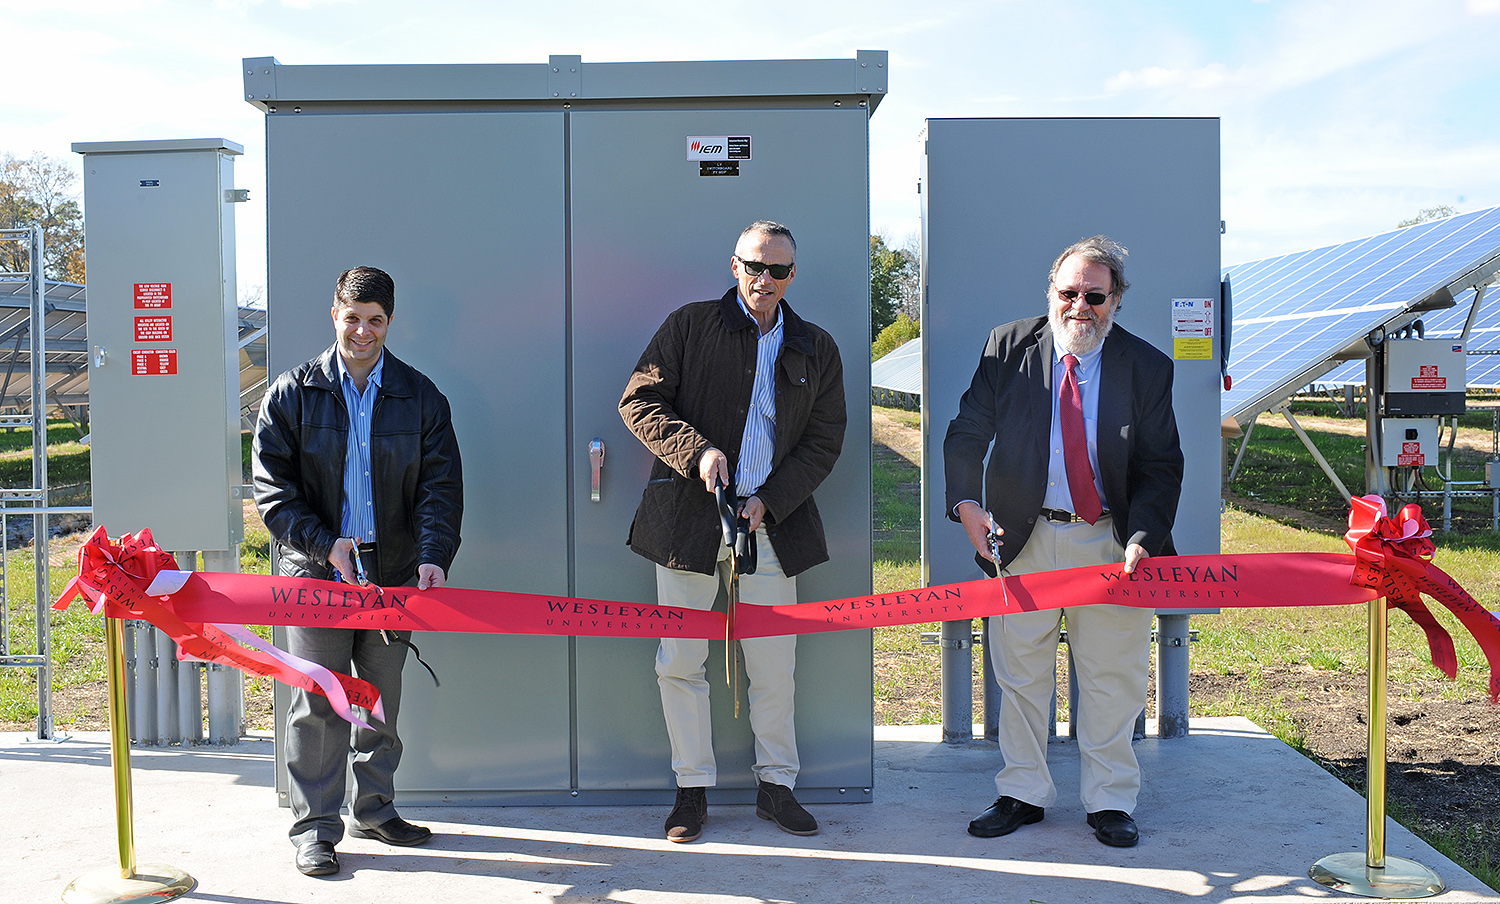 City of Middletown Mayor Daniel Drew, Wesleyan President Michael Roth, and former Vice President for Finance and Administration John Meerts participated in a ribbon-cutting ceremony Nov. 1 for Wesleyan's new photo 